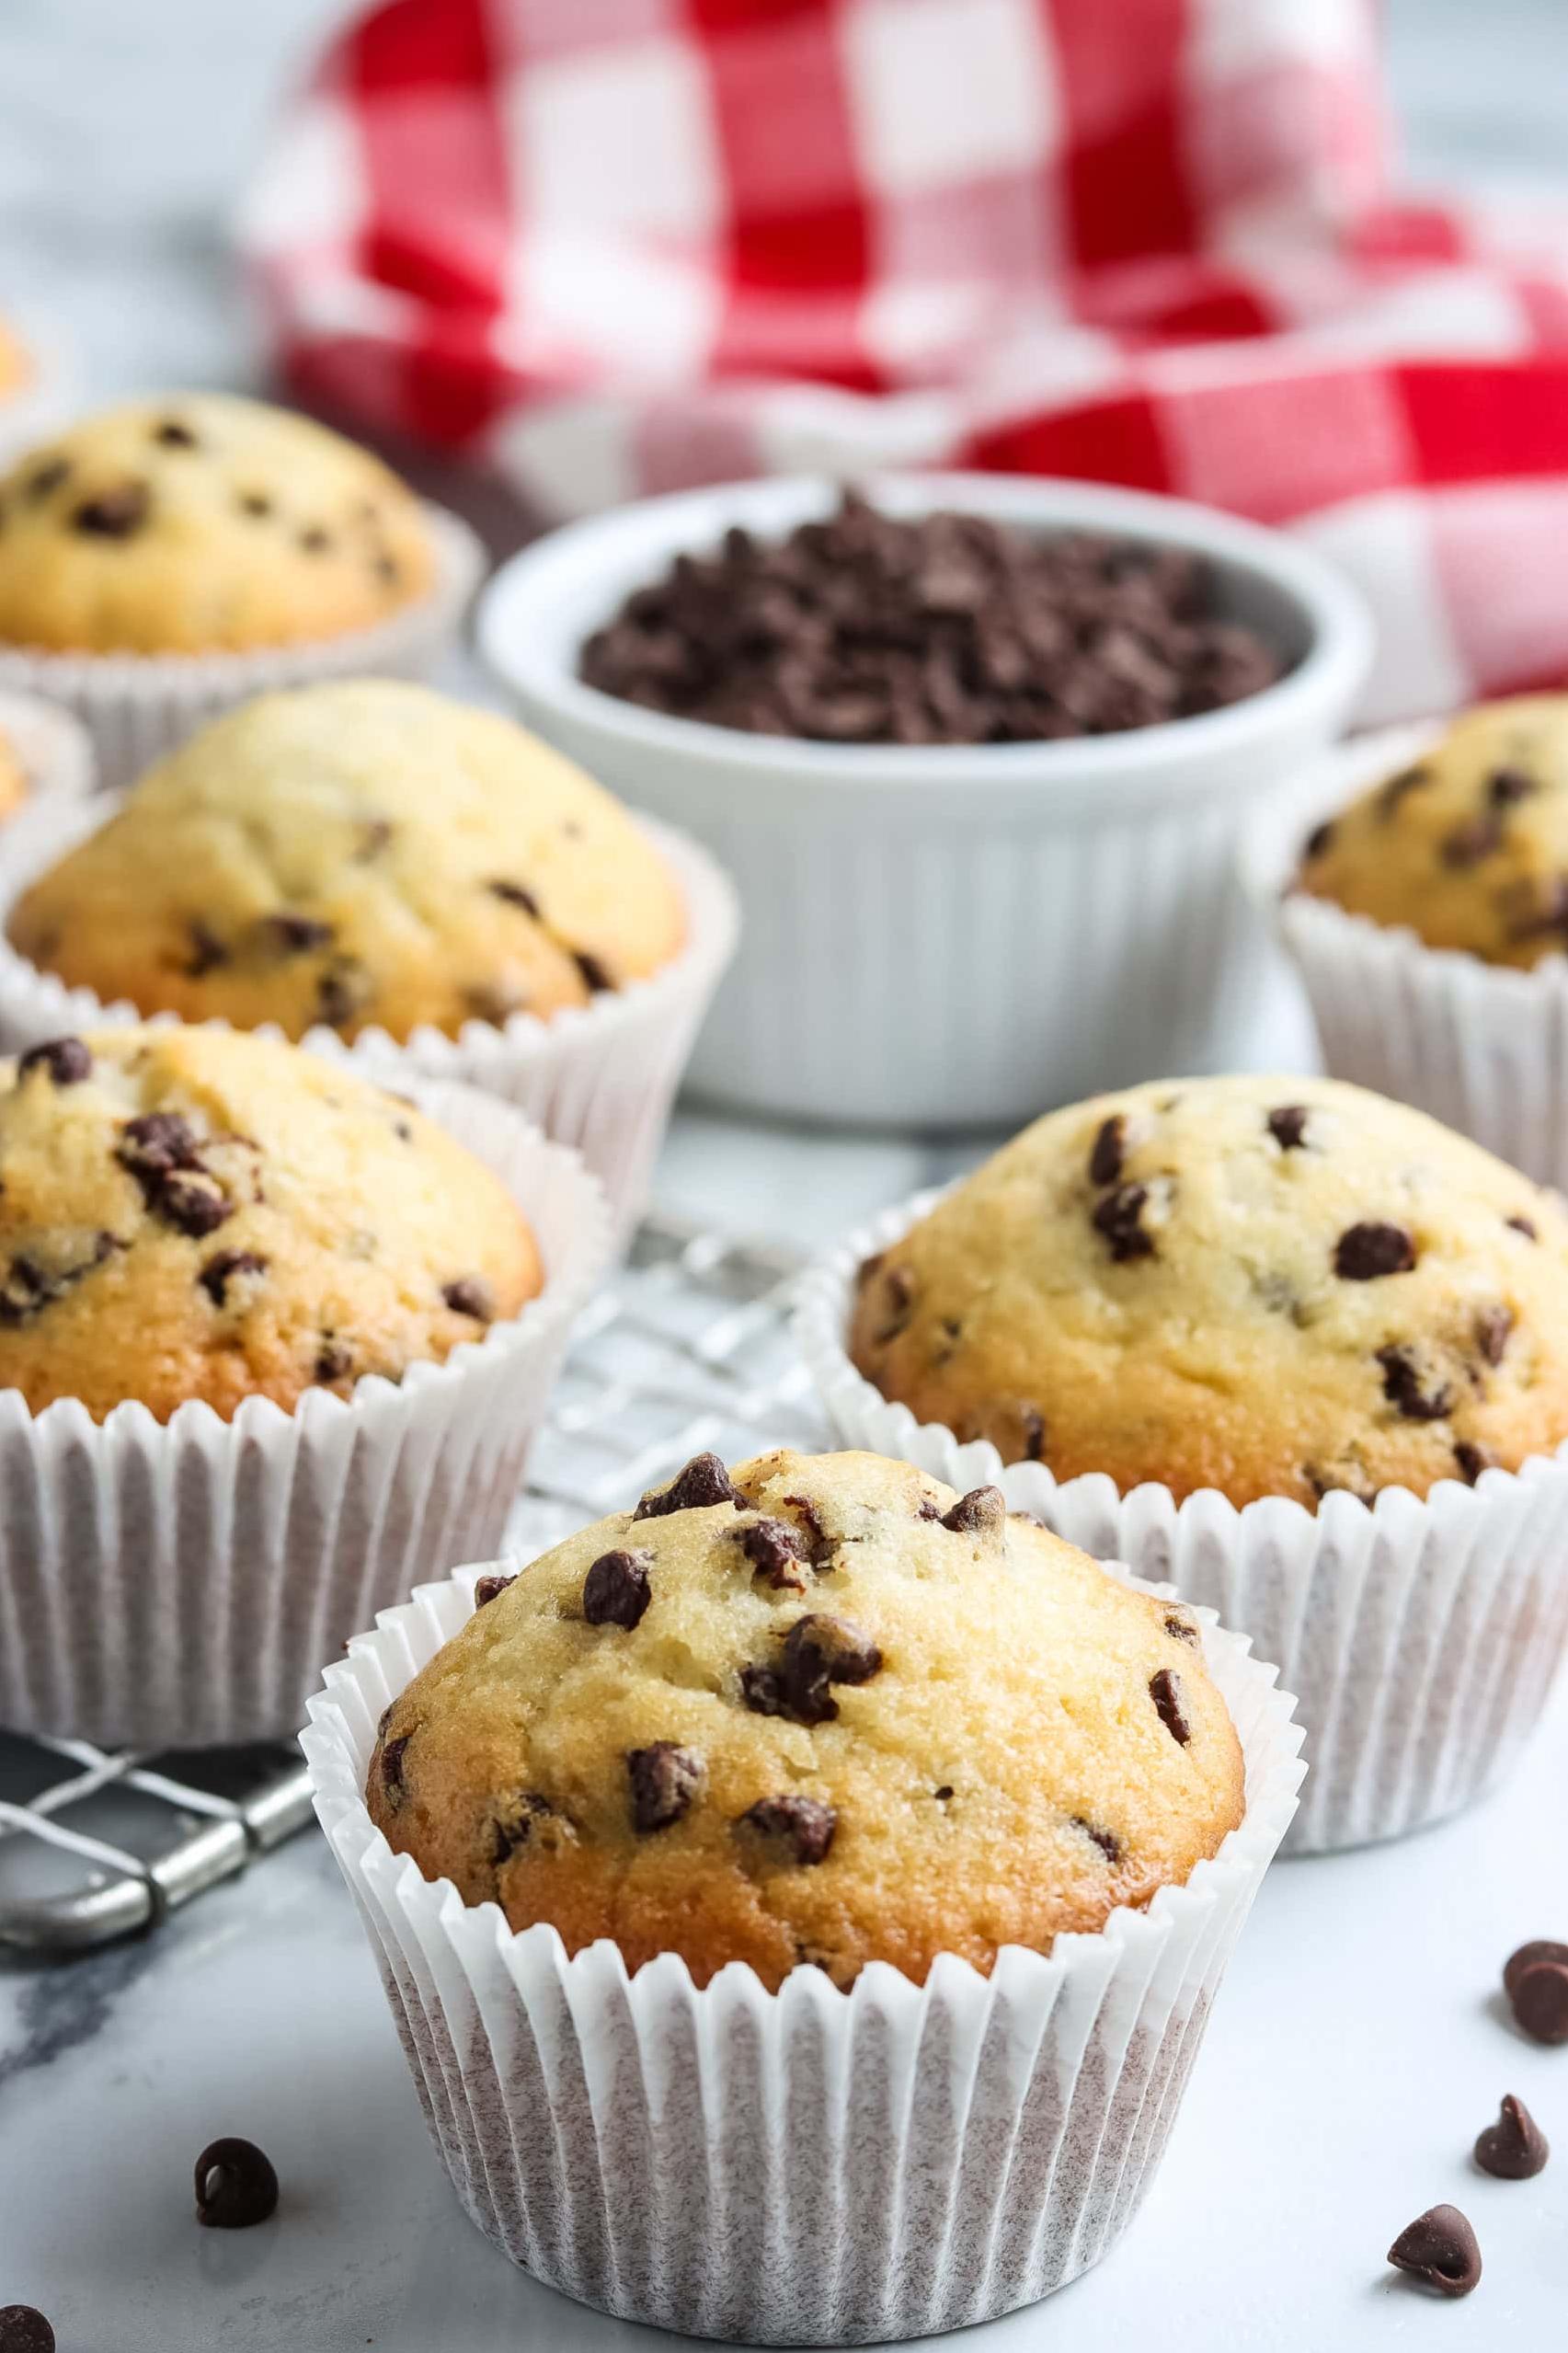  Healthy eating doesn't mean compromising taste buds! These gluten-free Chocolate Chip Muffins will make your taste buds dance with joy.